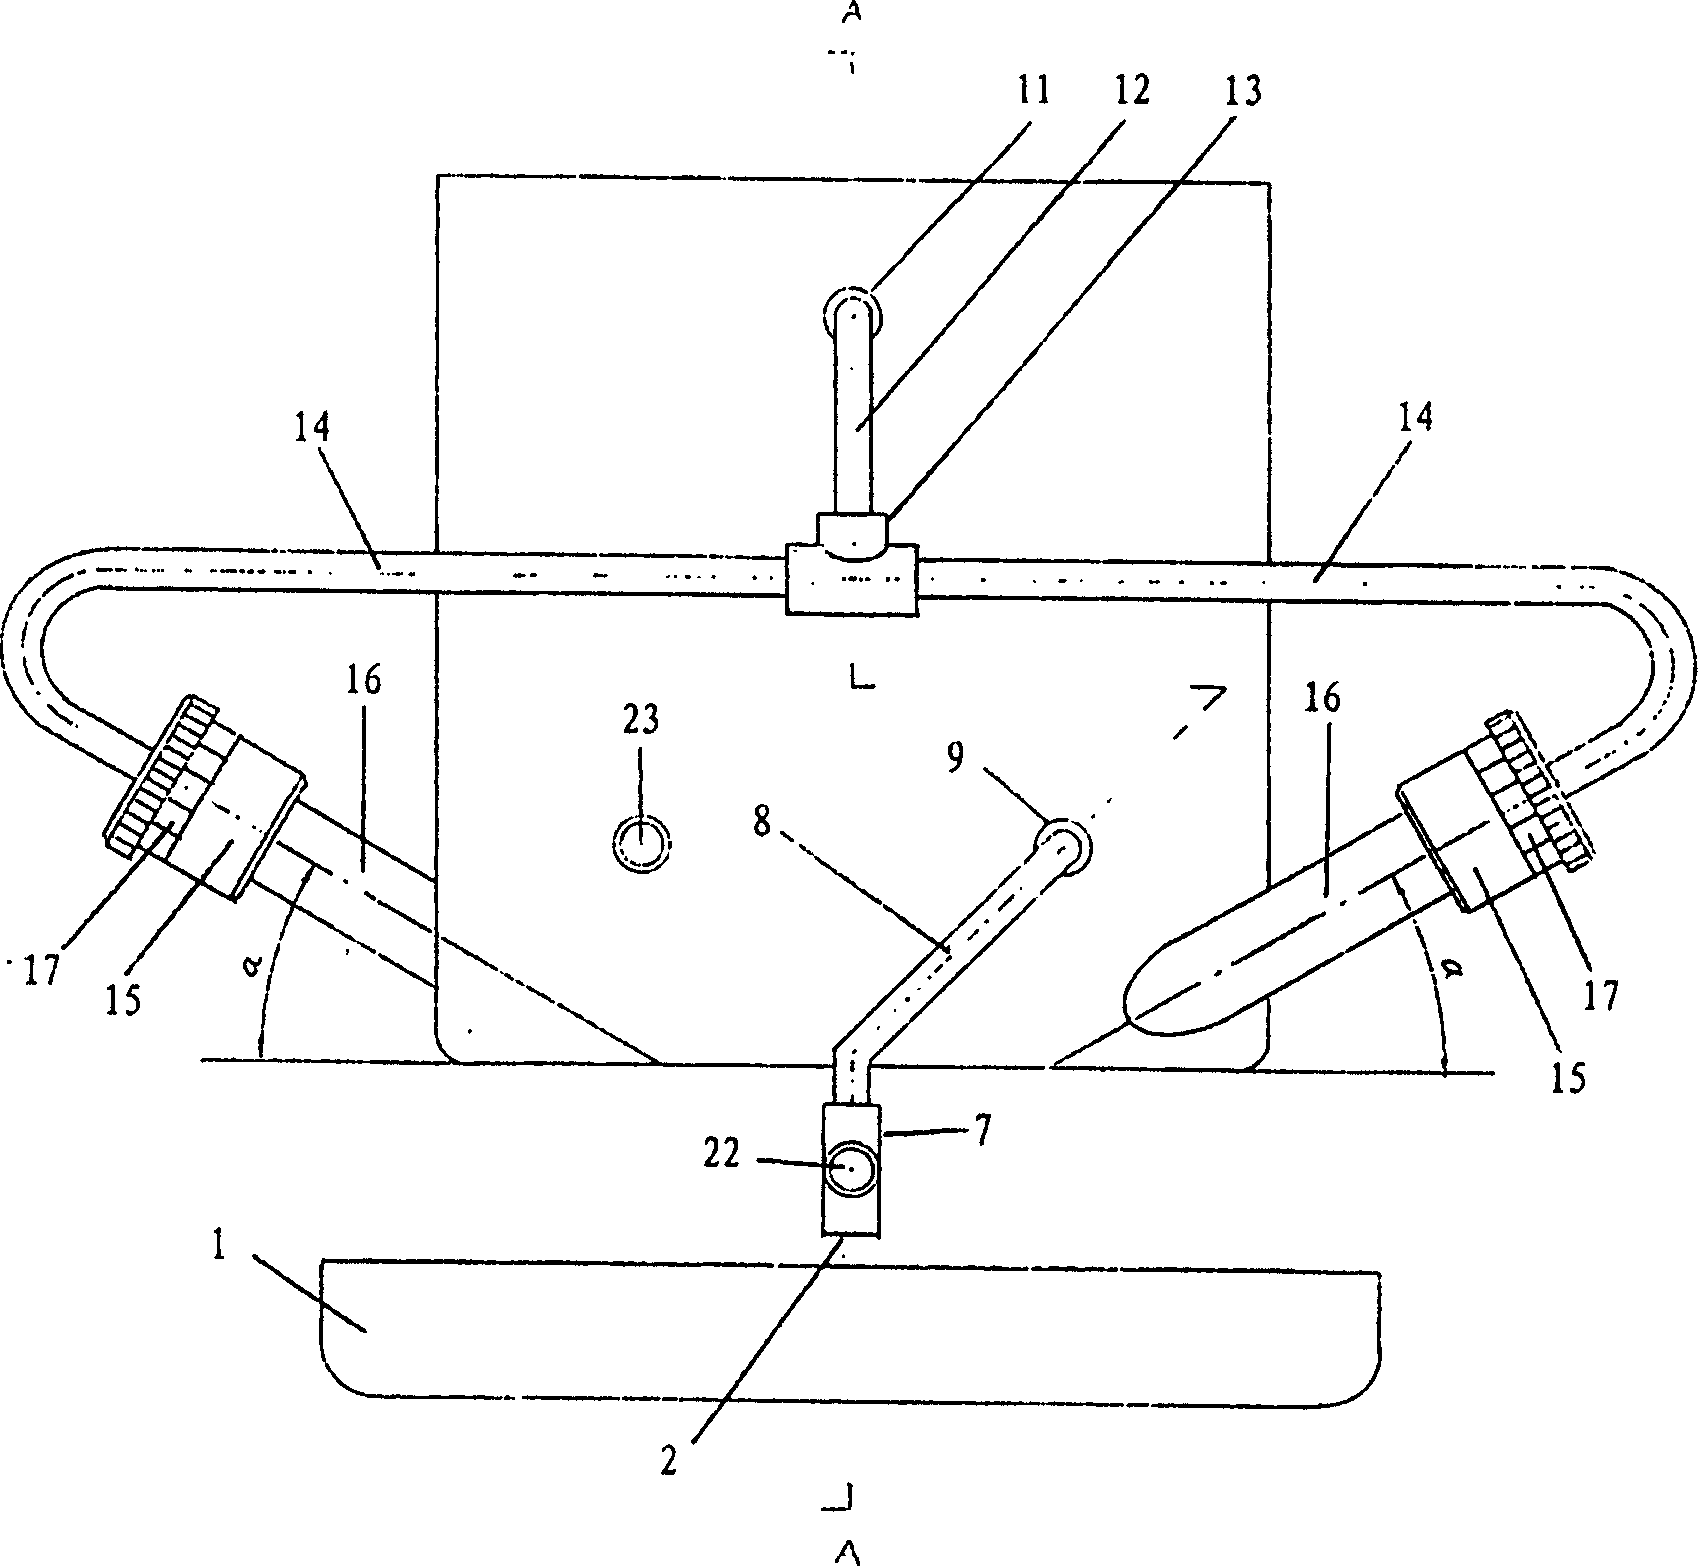 Liquid fuel evaporation and combustion furnace head